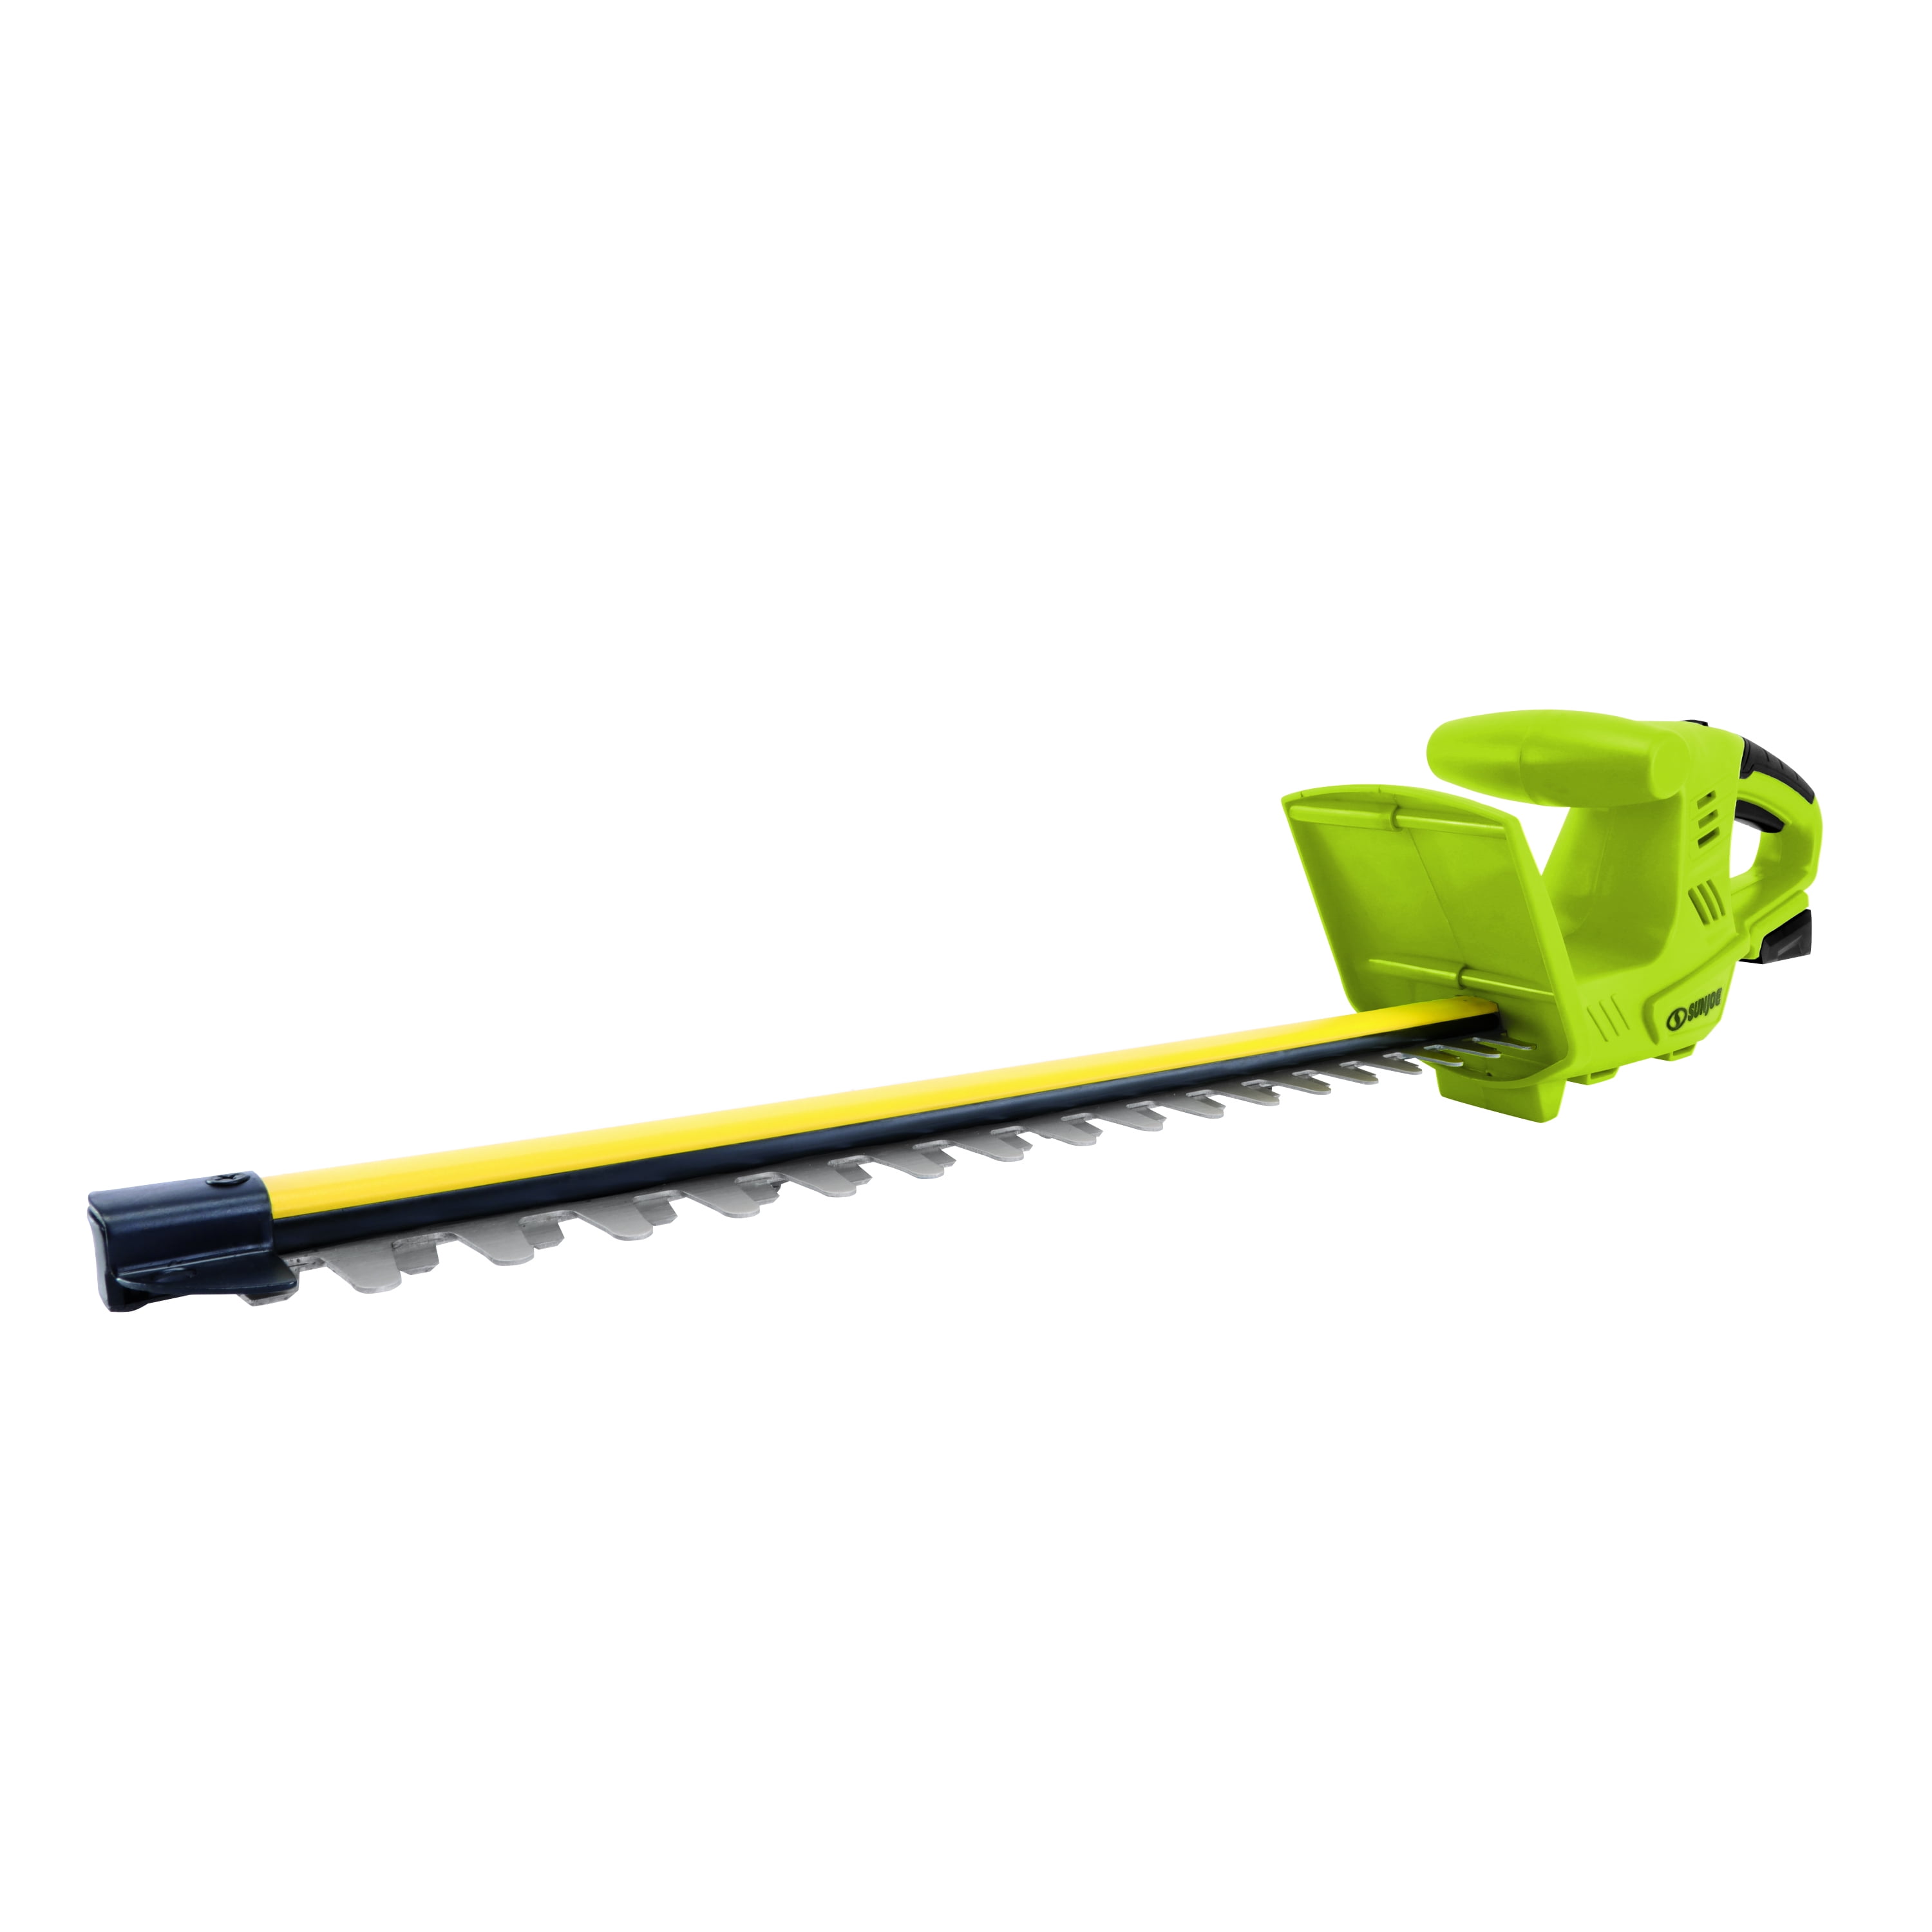 Details about   7.2V Electric Rechargeable Cordless Trimmer Hedge Pruning Weeder Scissors Tool 